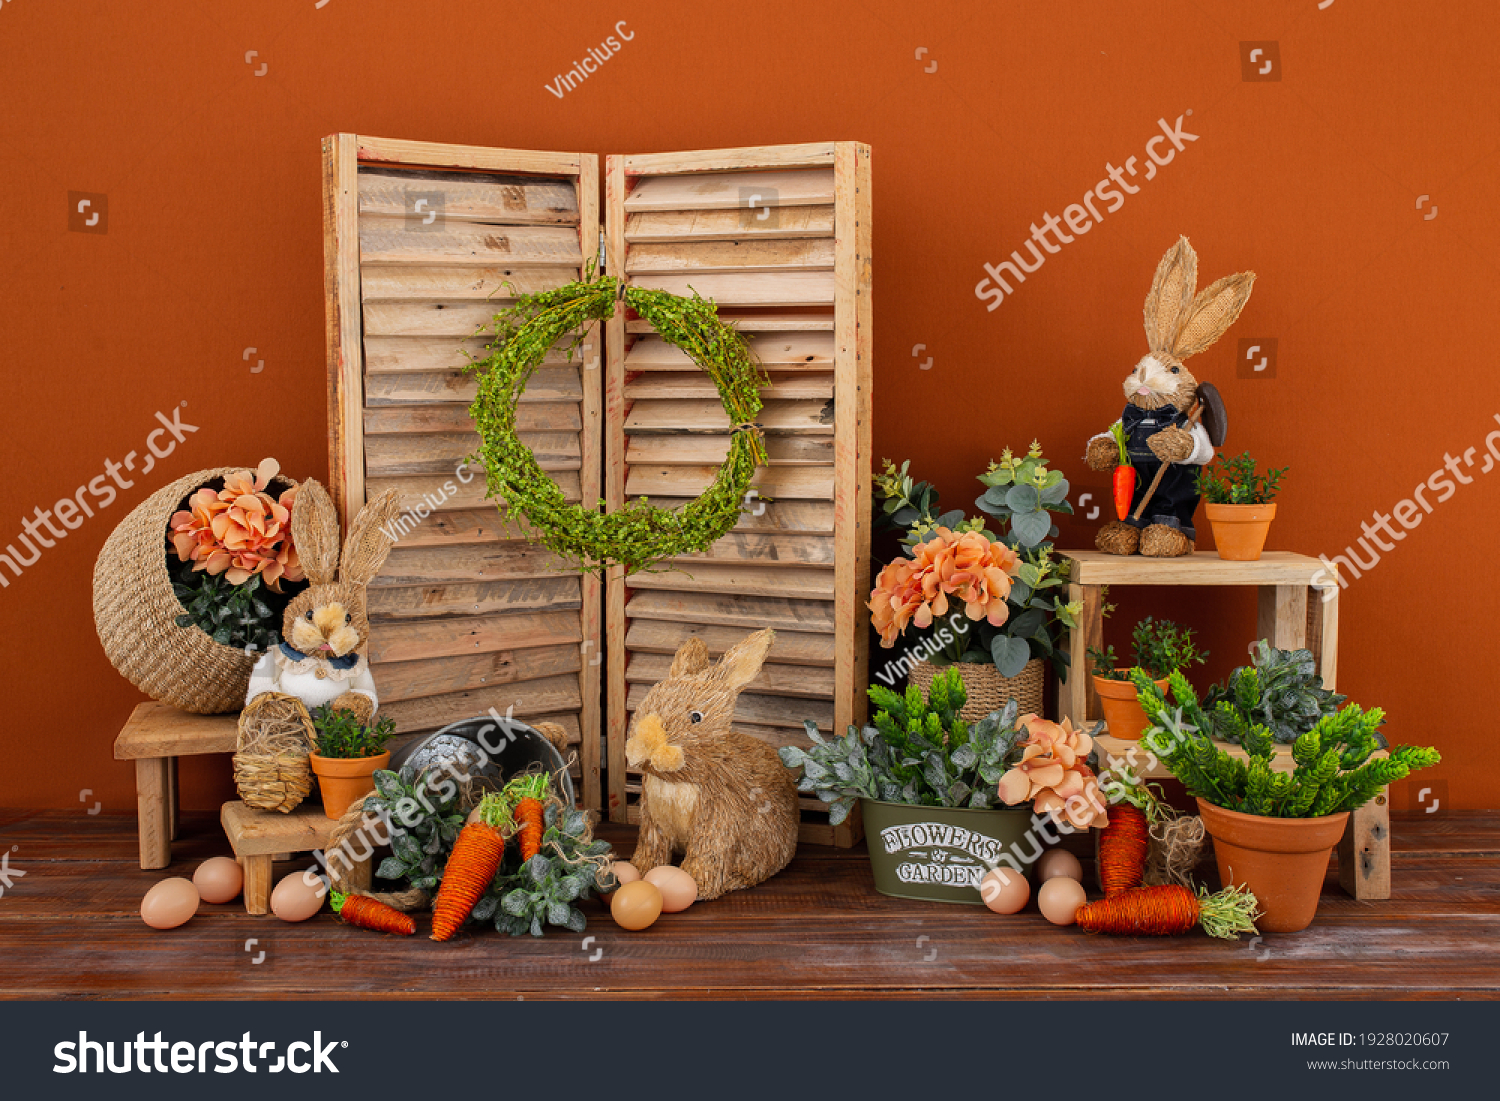 Easter backdrop or background for photo mini session in brown color. Contains straw rabbits. #1928020607